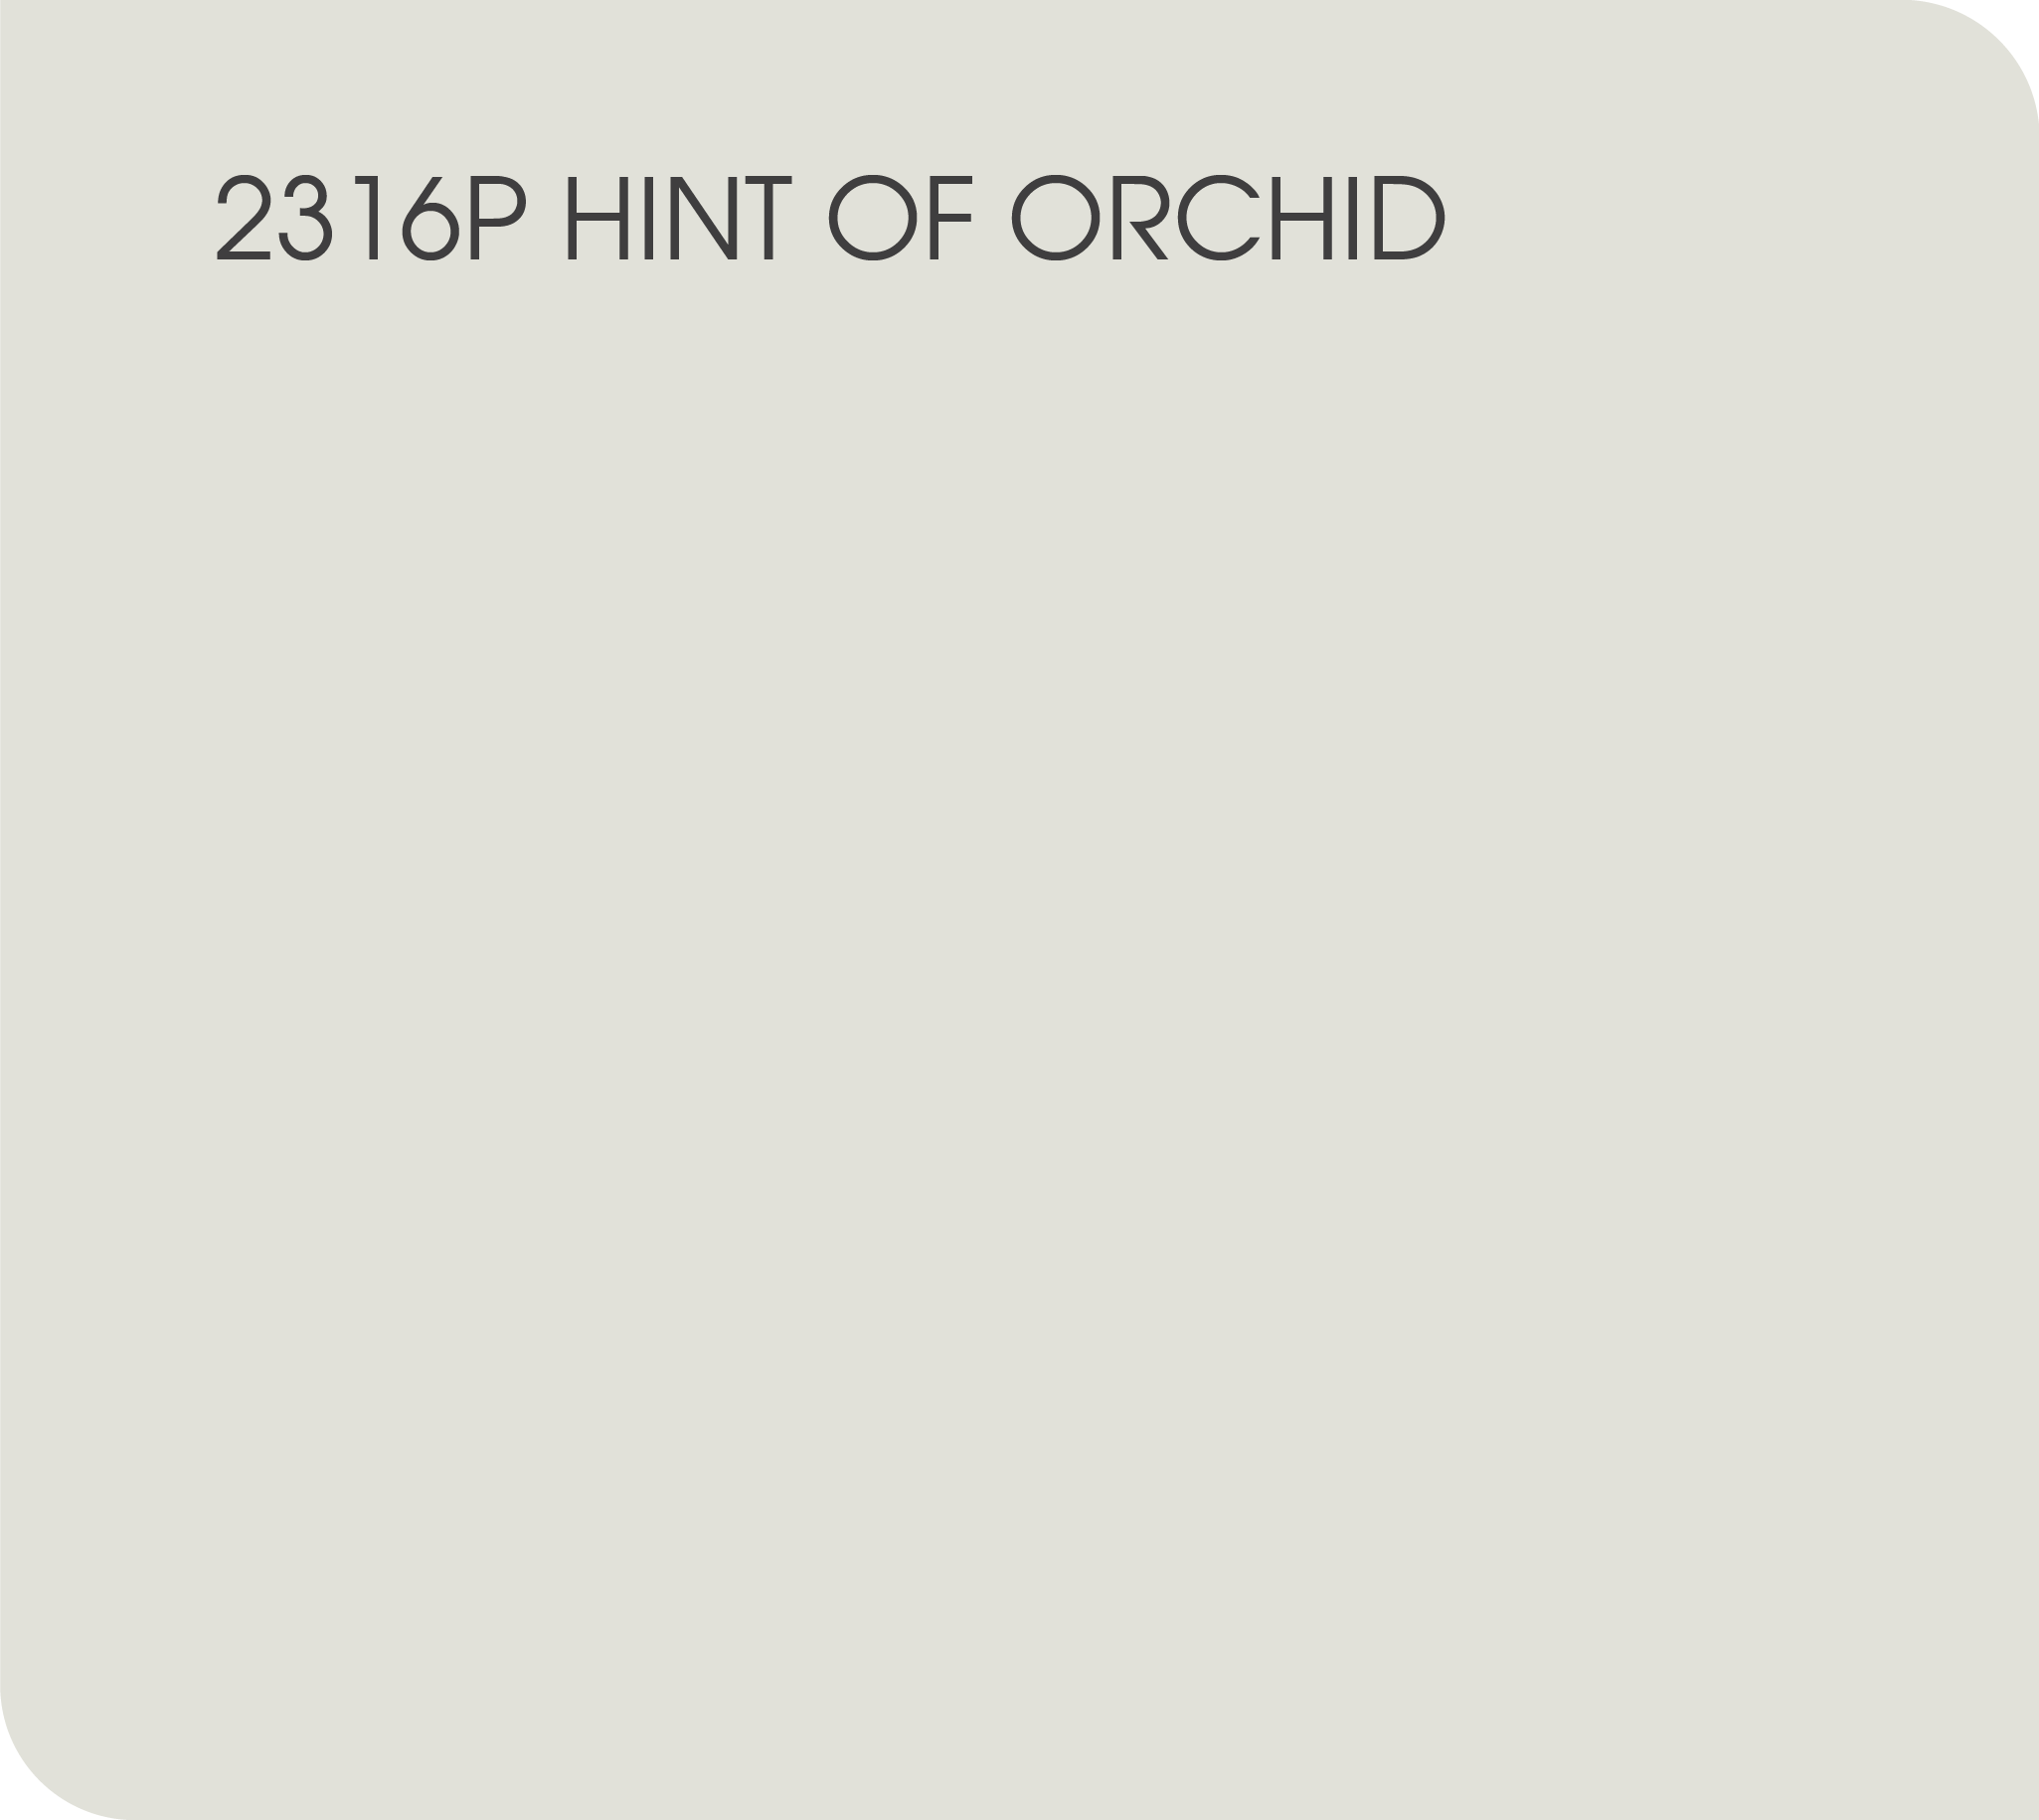 Hint of orchid 2316P